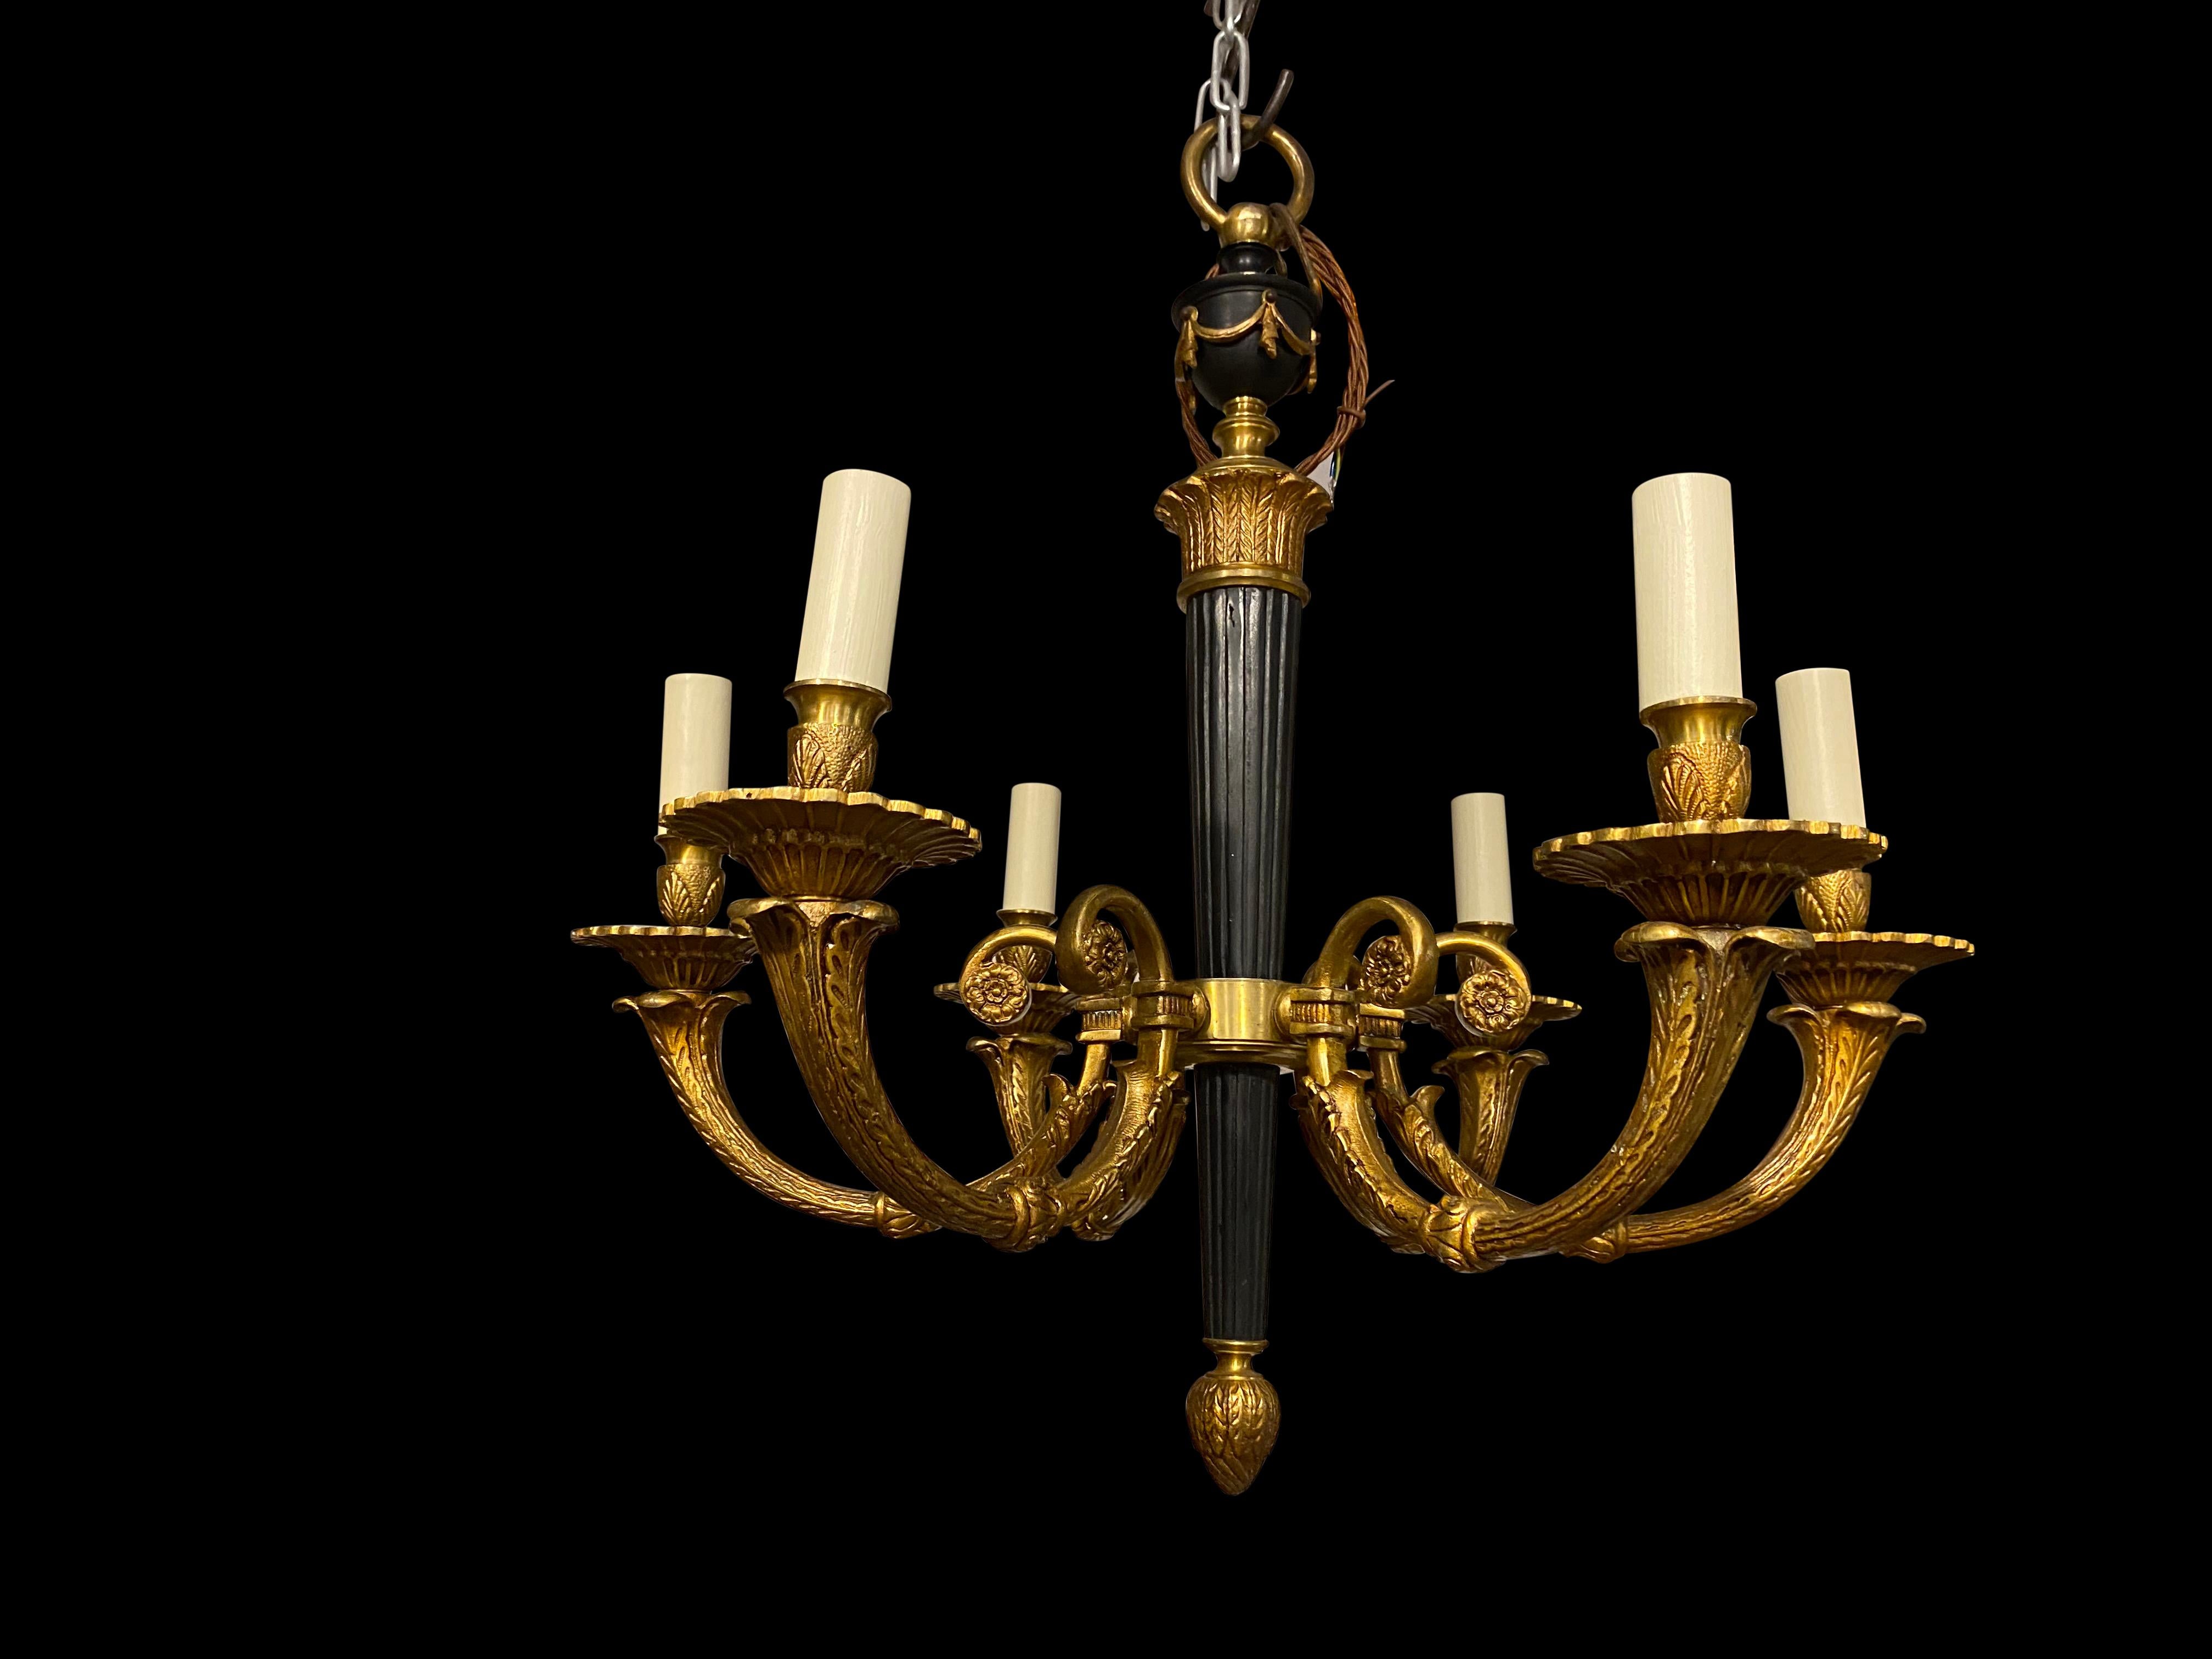 A 19th century French Empire chandelier, with central column and arrow sheath top cascading into an acorn finial. Surrounded by 6 elegant ormolu casted arms.